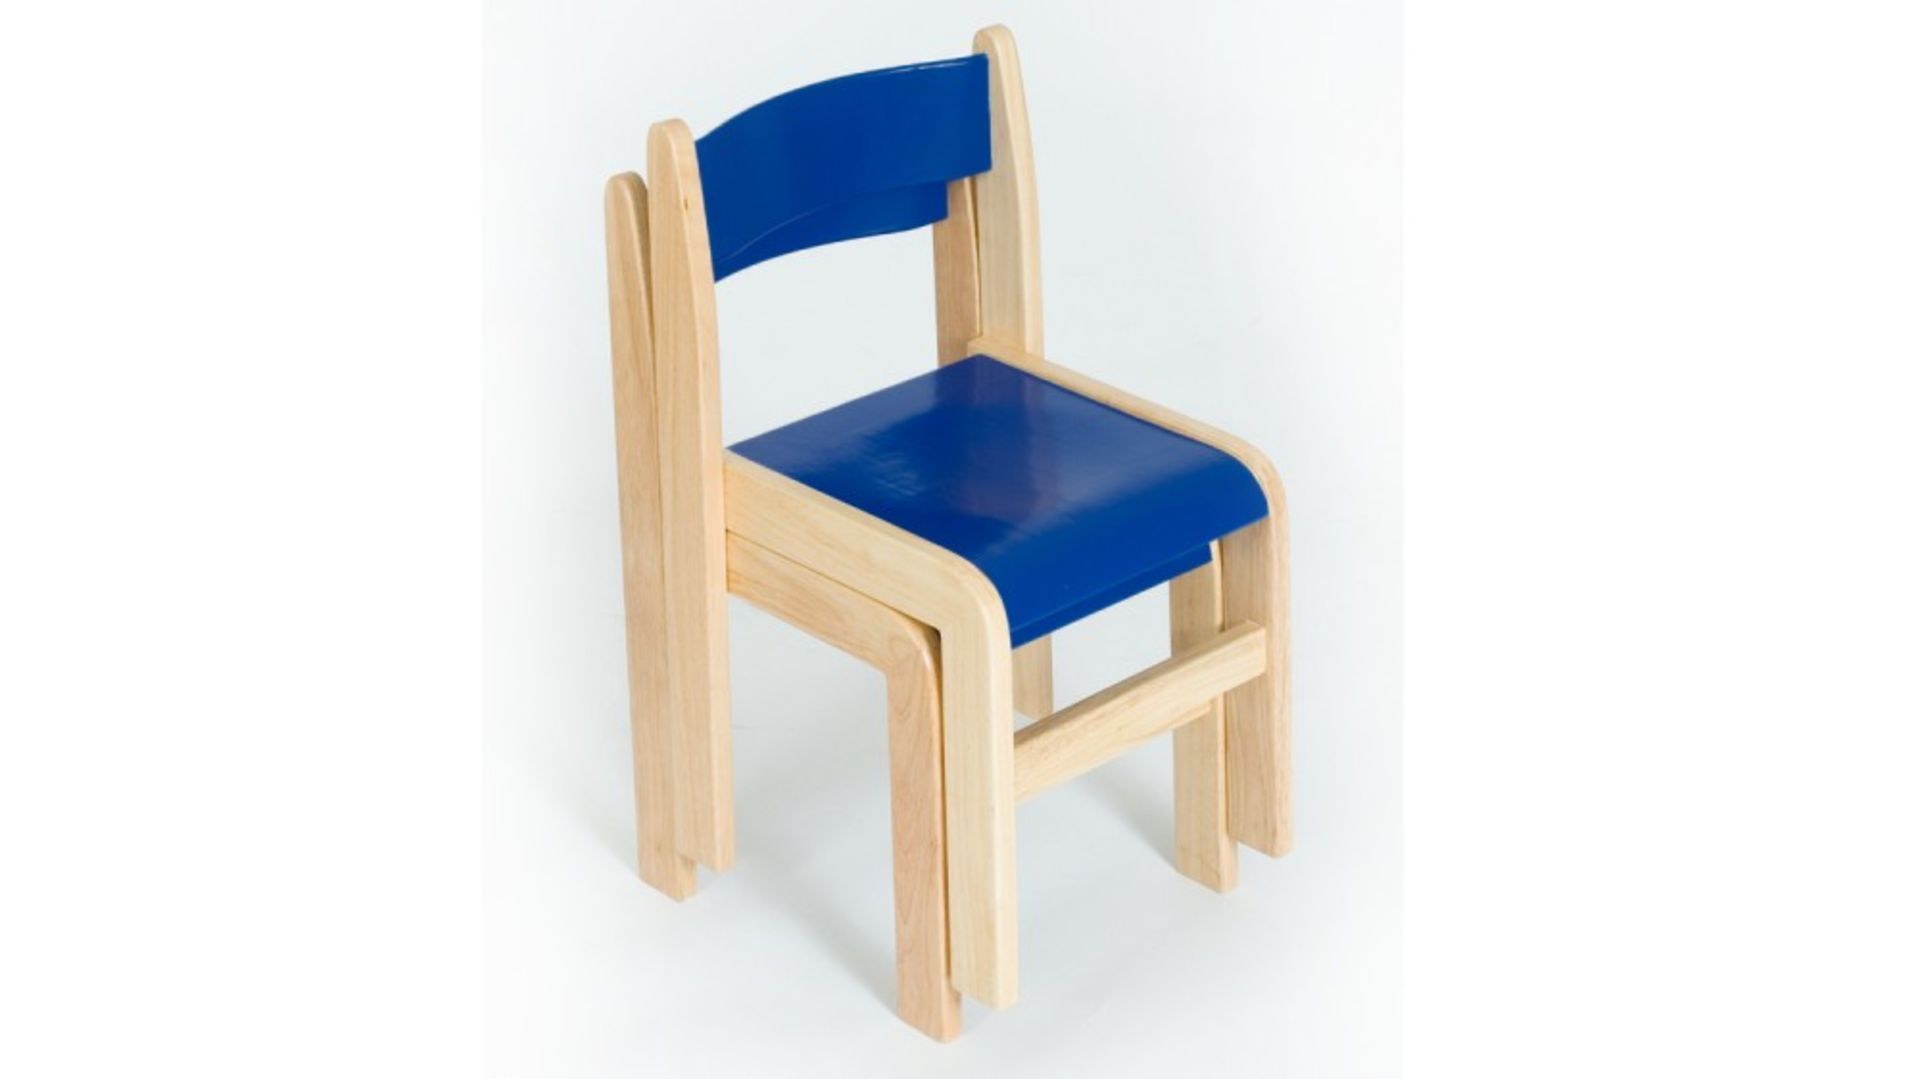 Pallet to Contain 8 x Sets of 2 Tuf Class Wooden Chair Blue. RRP £175 per set, total pallet RRP £1,